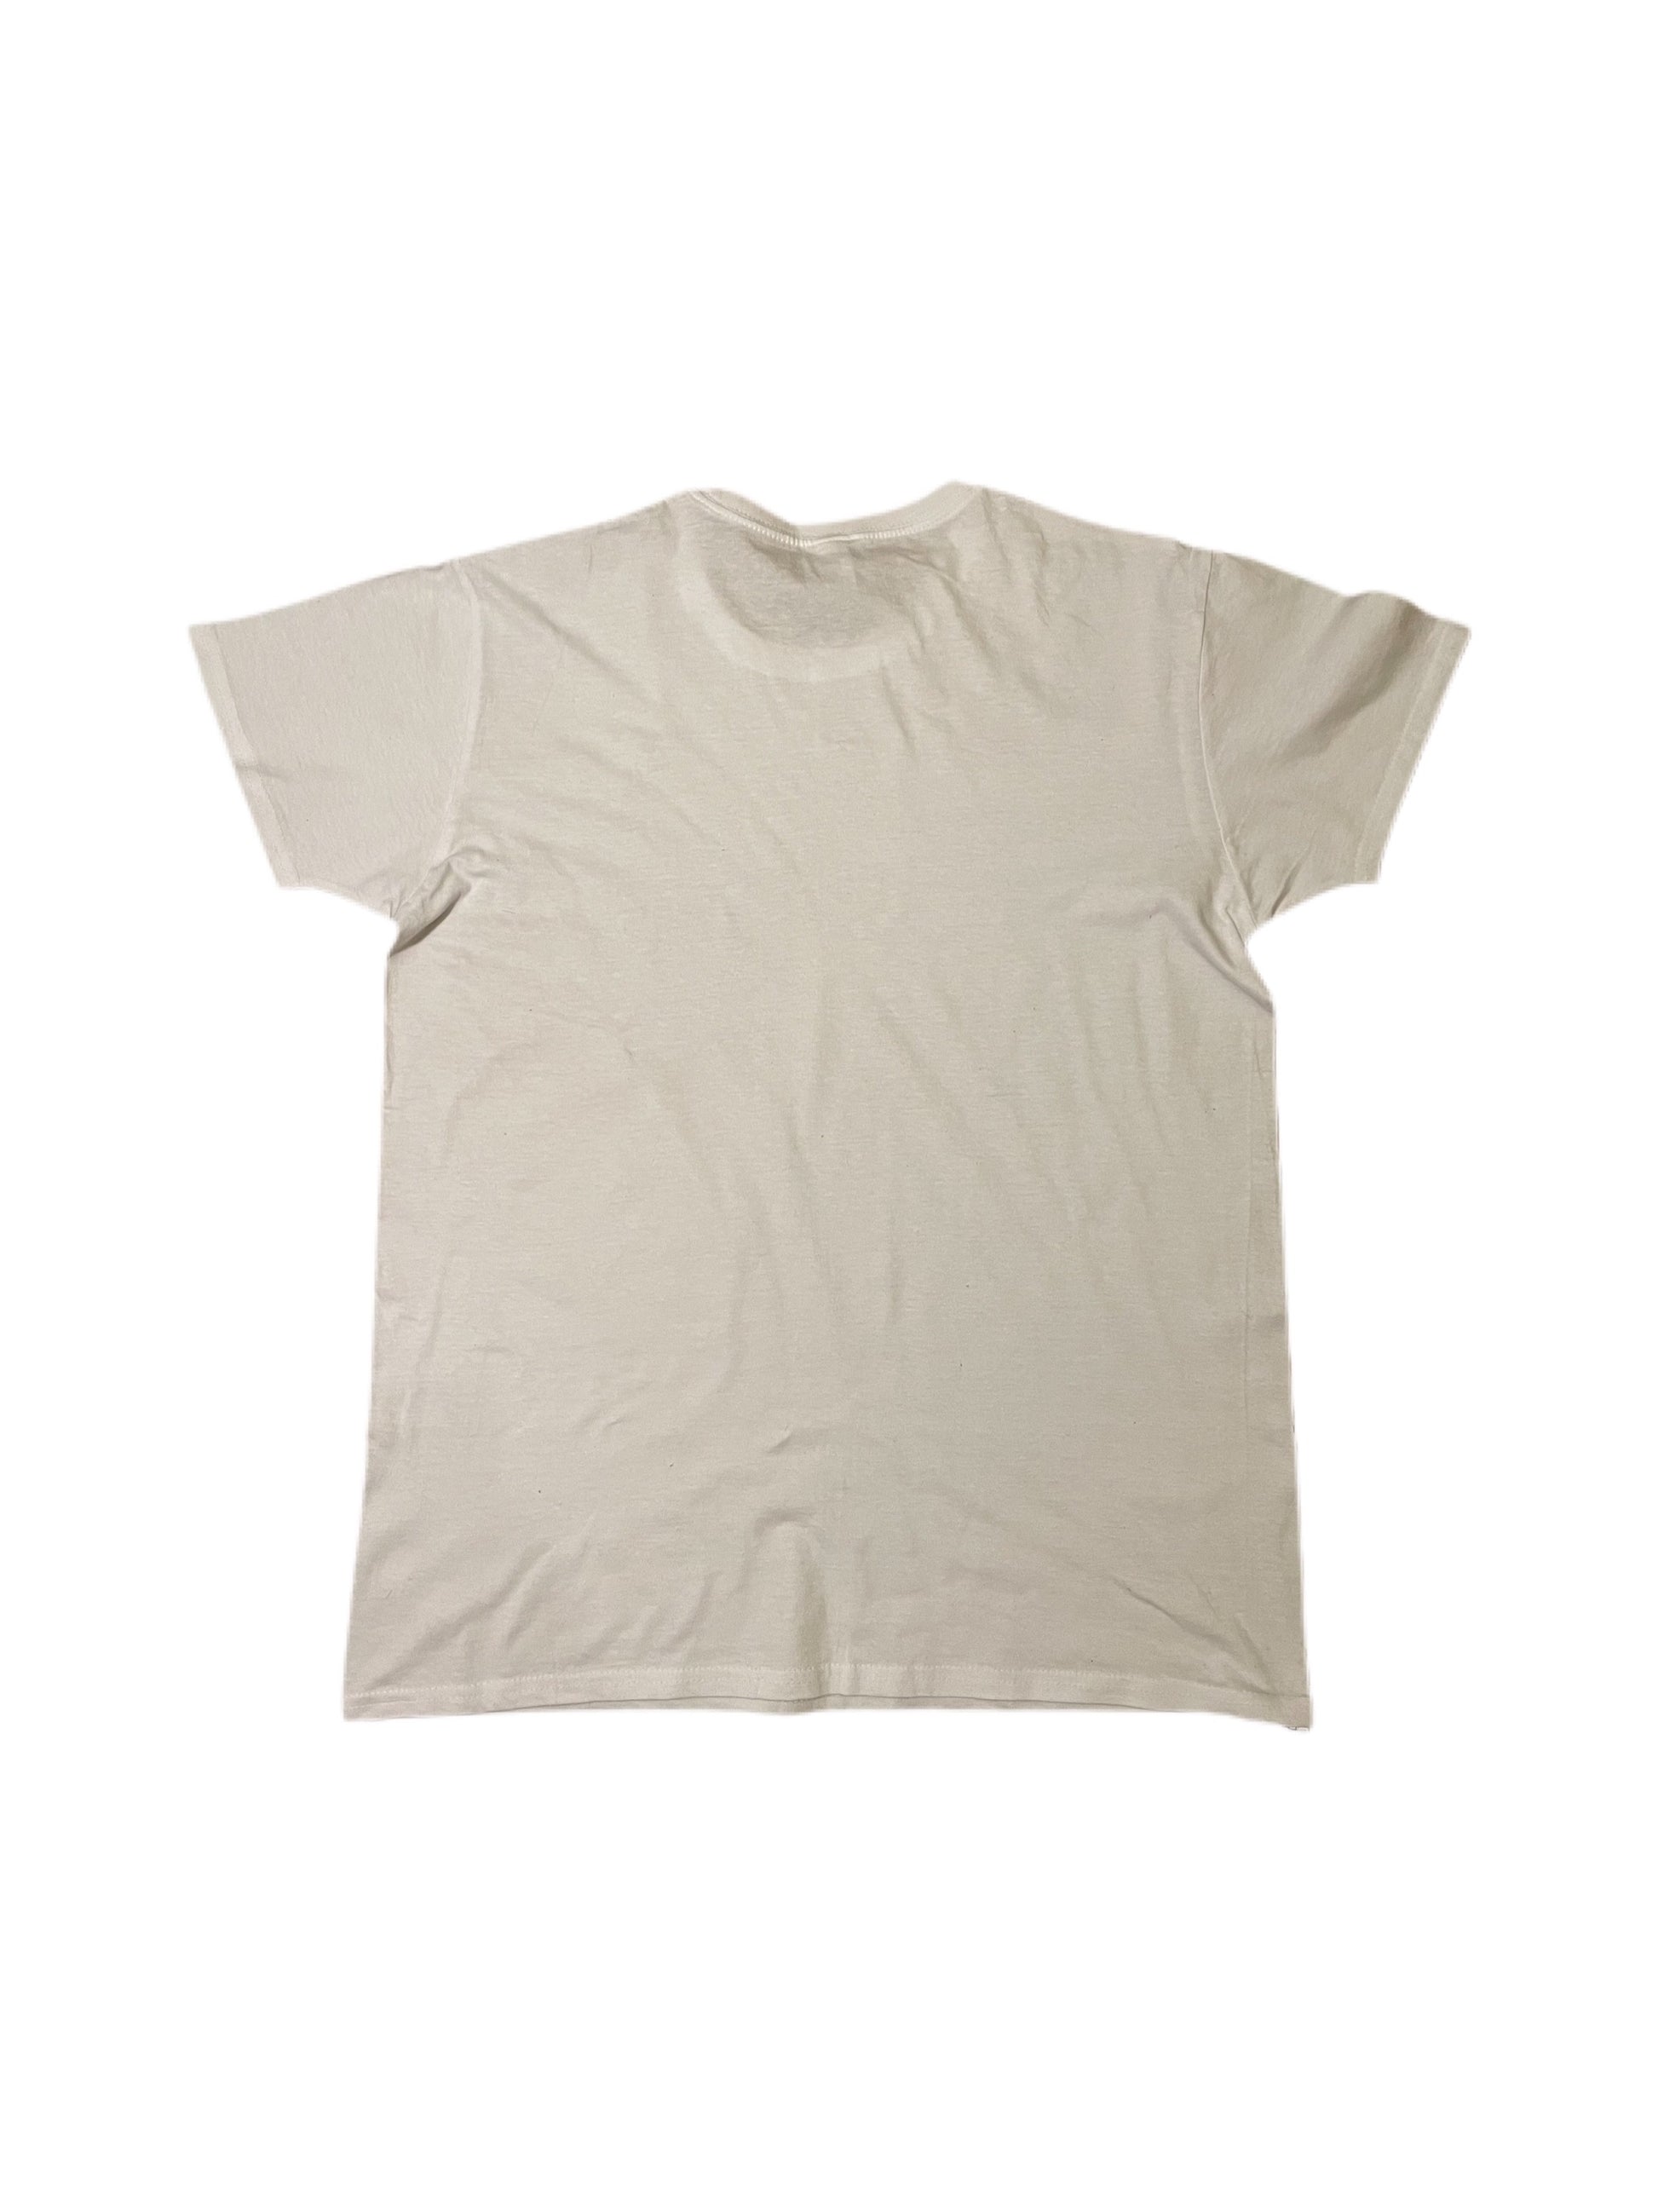 Face T-Shirt 2 Product Back | Beatrice Bayliss